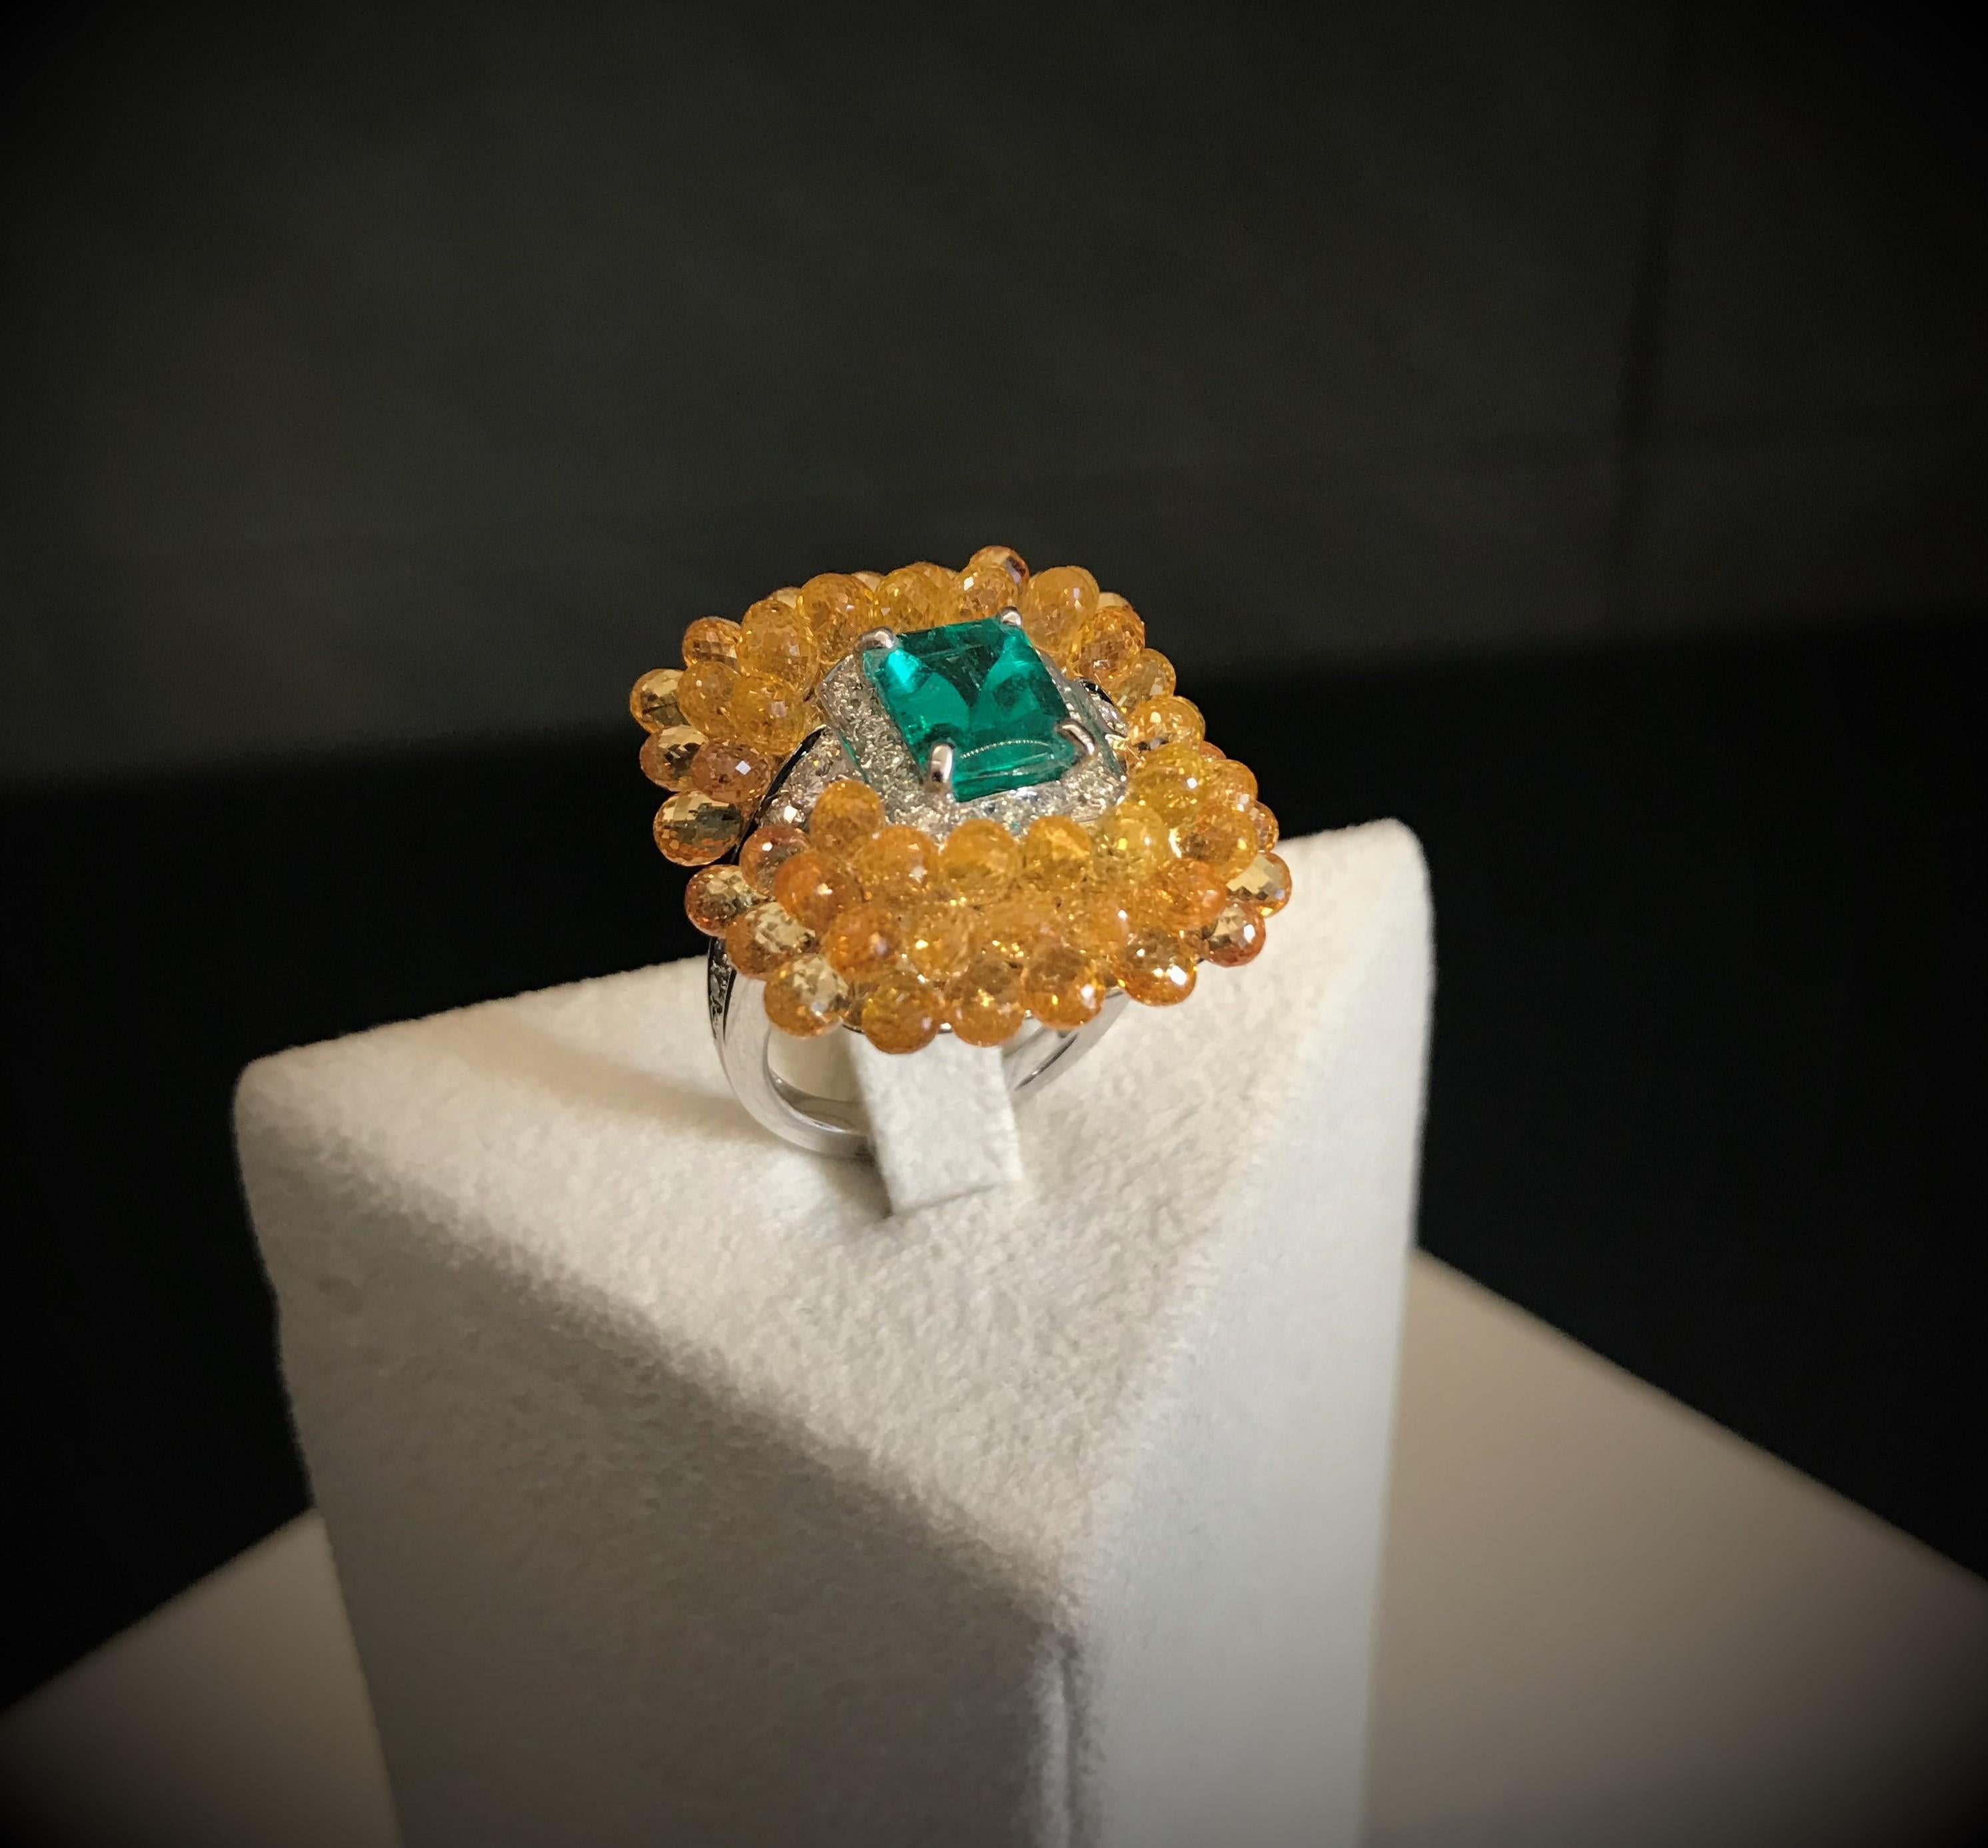 Briolette cut sapphires are only the wonderful pretext to adorn a splendid and glaming rare fancy cut emerald.

Diamonds ct 0.83
Emeralds ct 2.09
Sapphires total ct 20.51

Ring size: EU 13 (Resizable for 2/3 sizes)
